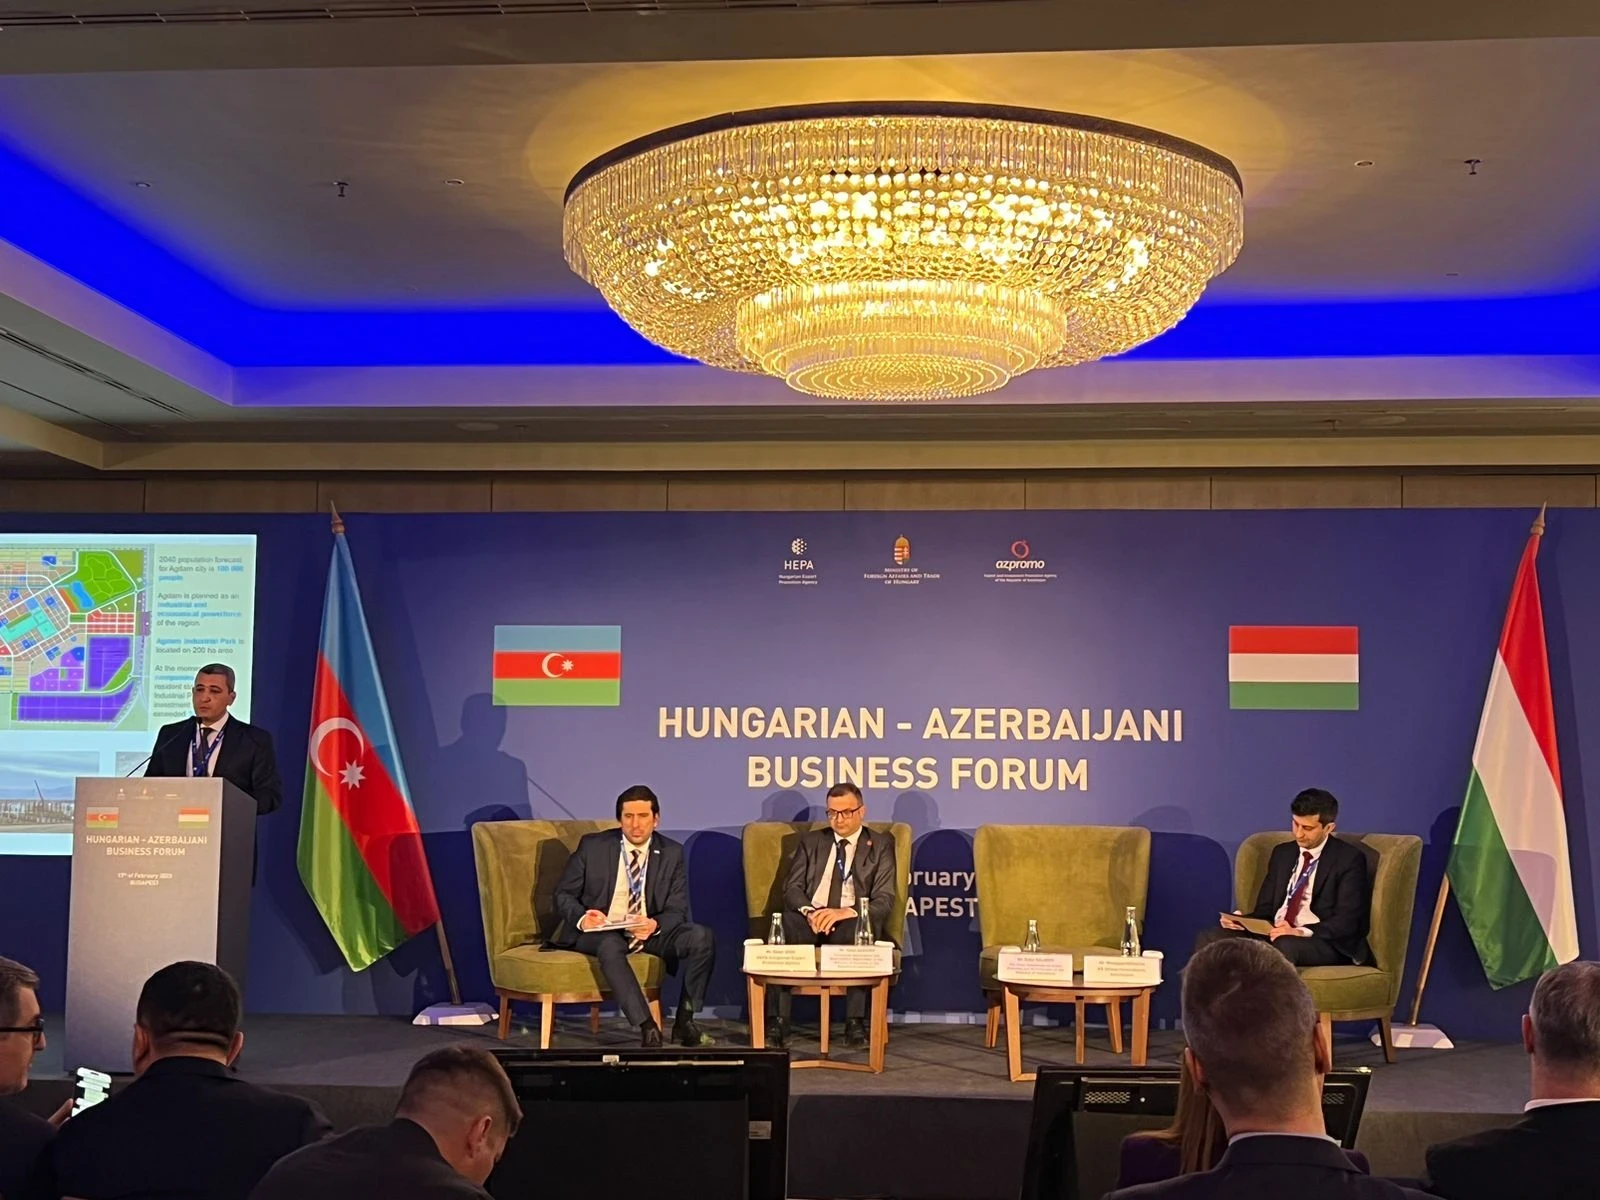 Urban planning activities carried out in the liberated territories were discussed at the Azerbaijan-Hungary Business Forum